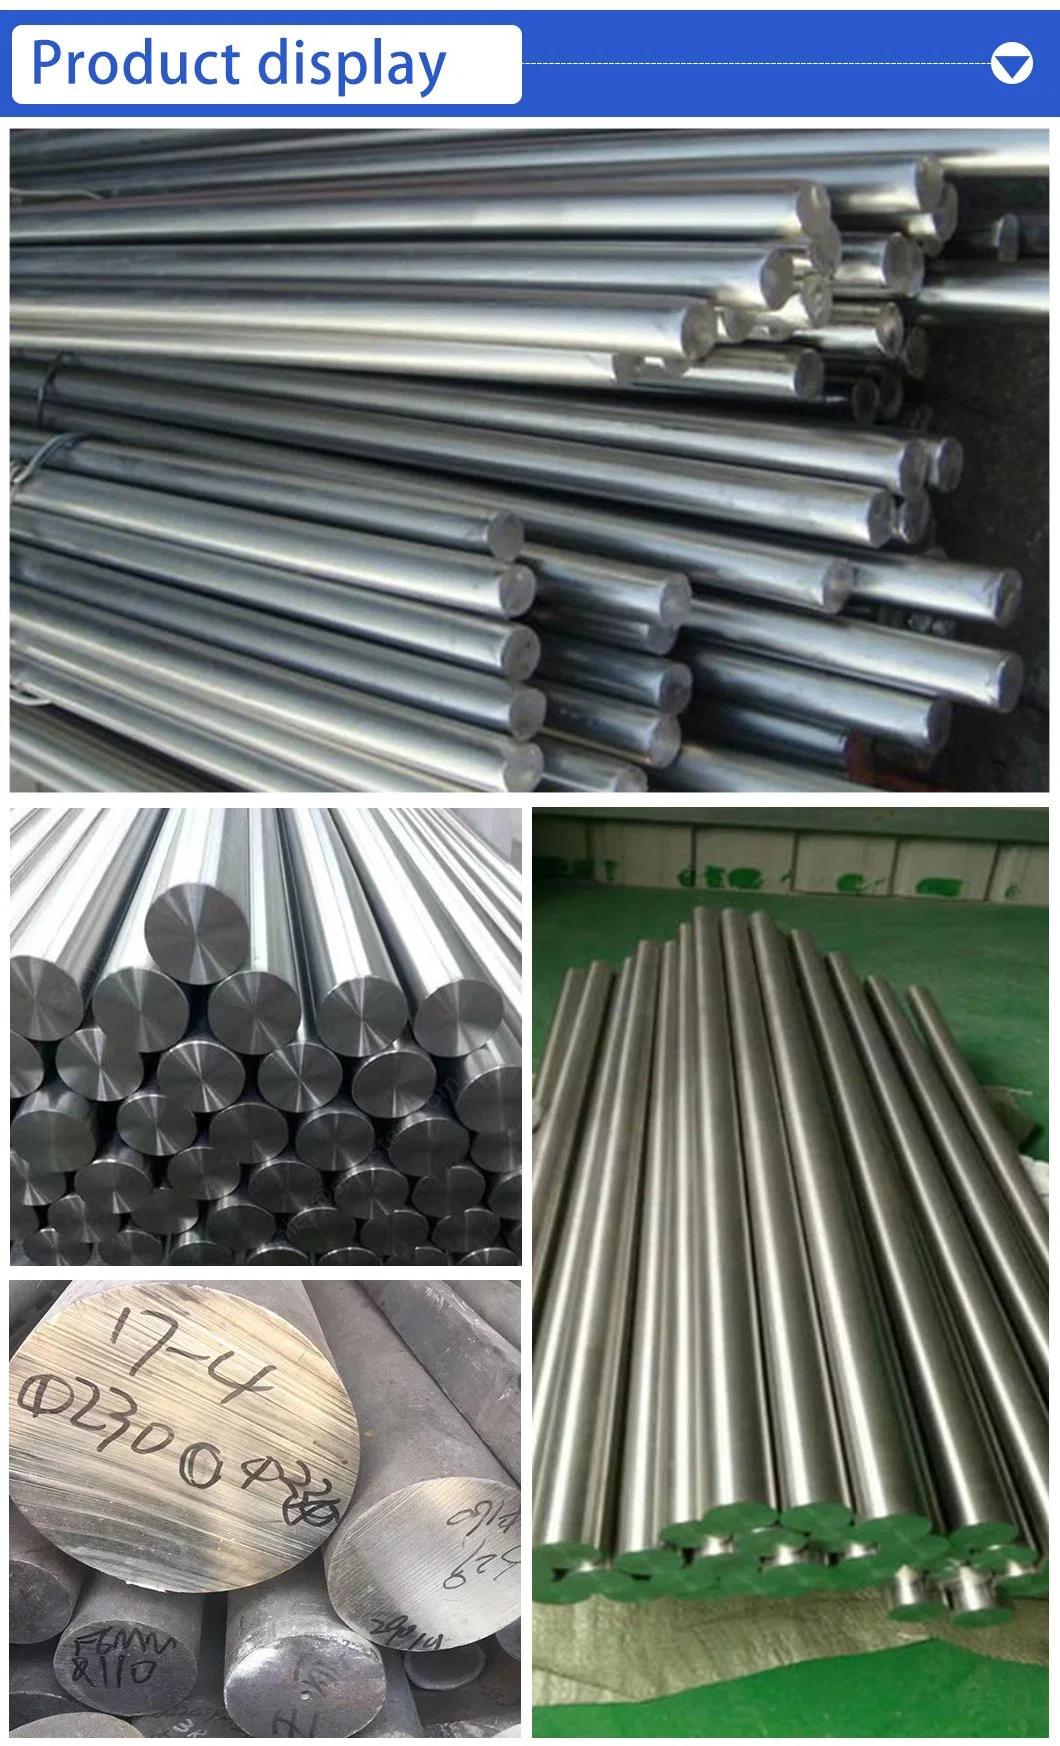 Stainless Steel Round Bar Ss 304L 306L 904L 310S 321 304 301 302 303 631 Hc 273 C22 800h 925 SAE 52100 Round Bar Stainless Steel Rod